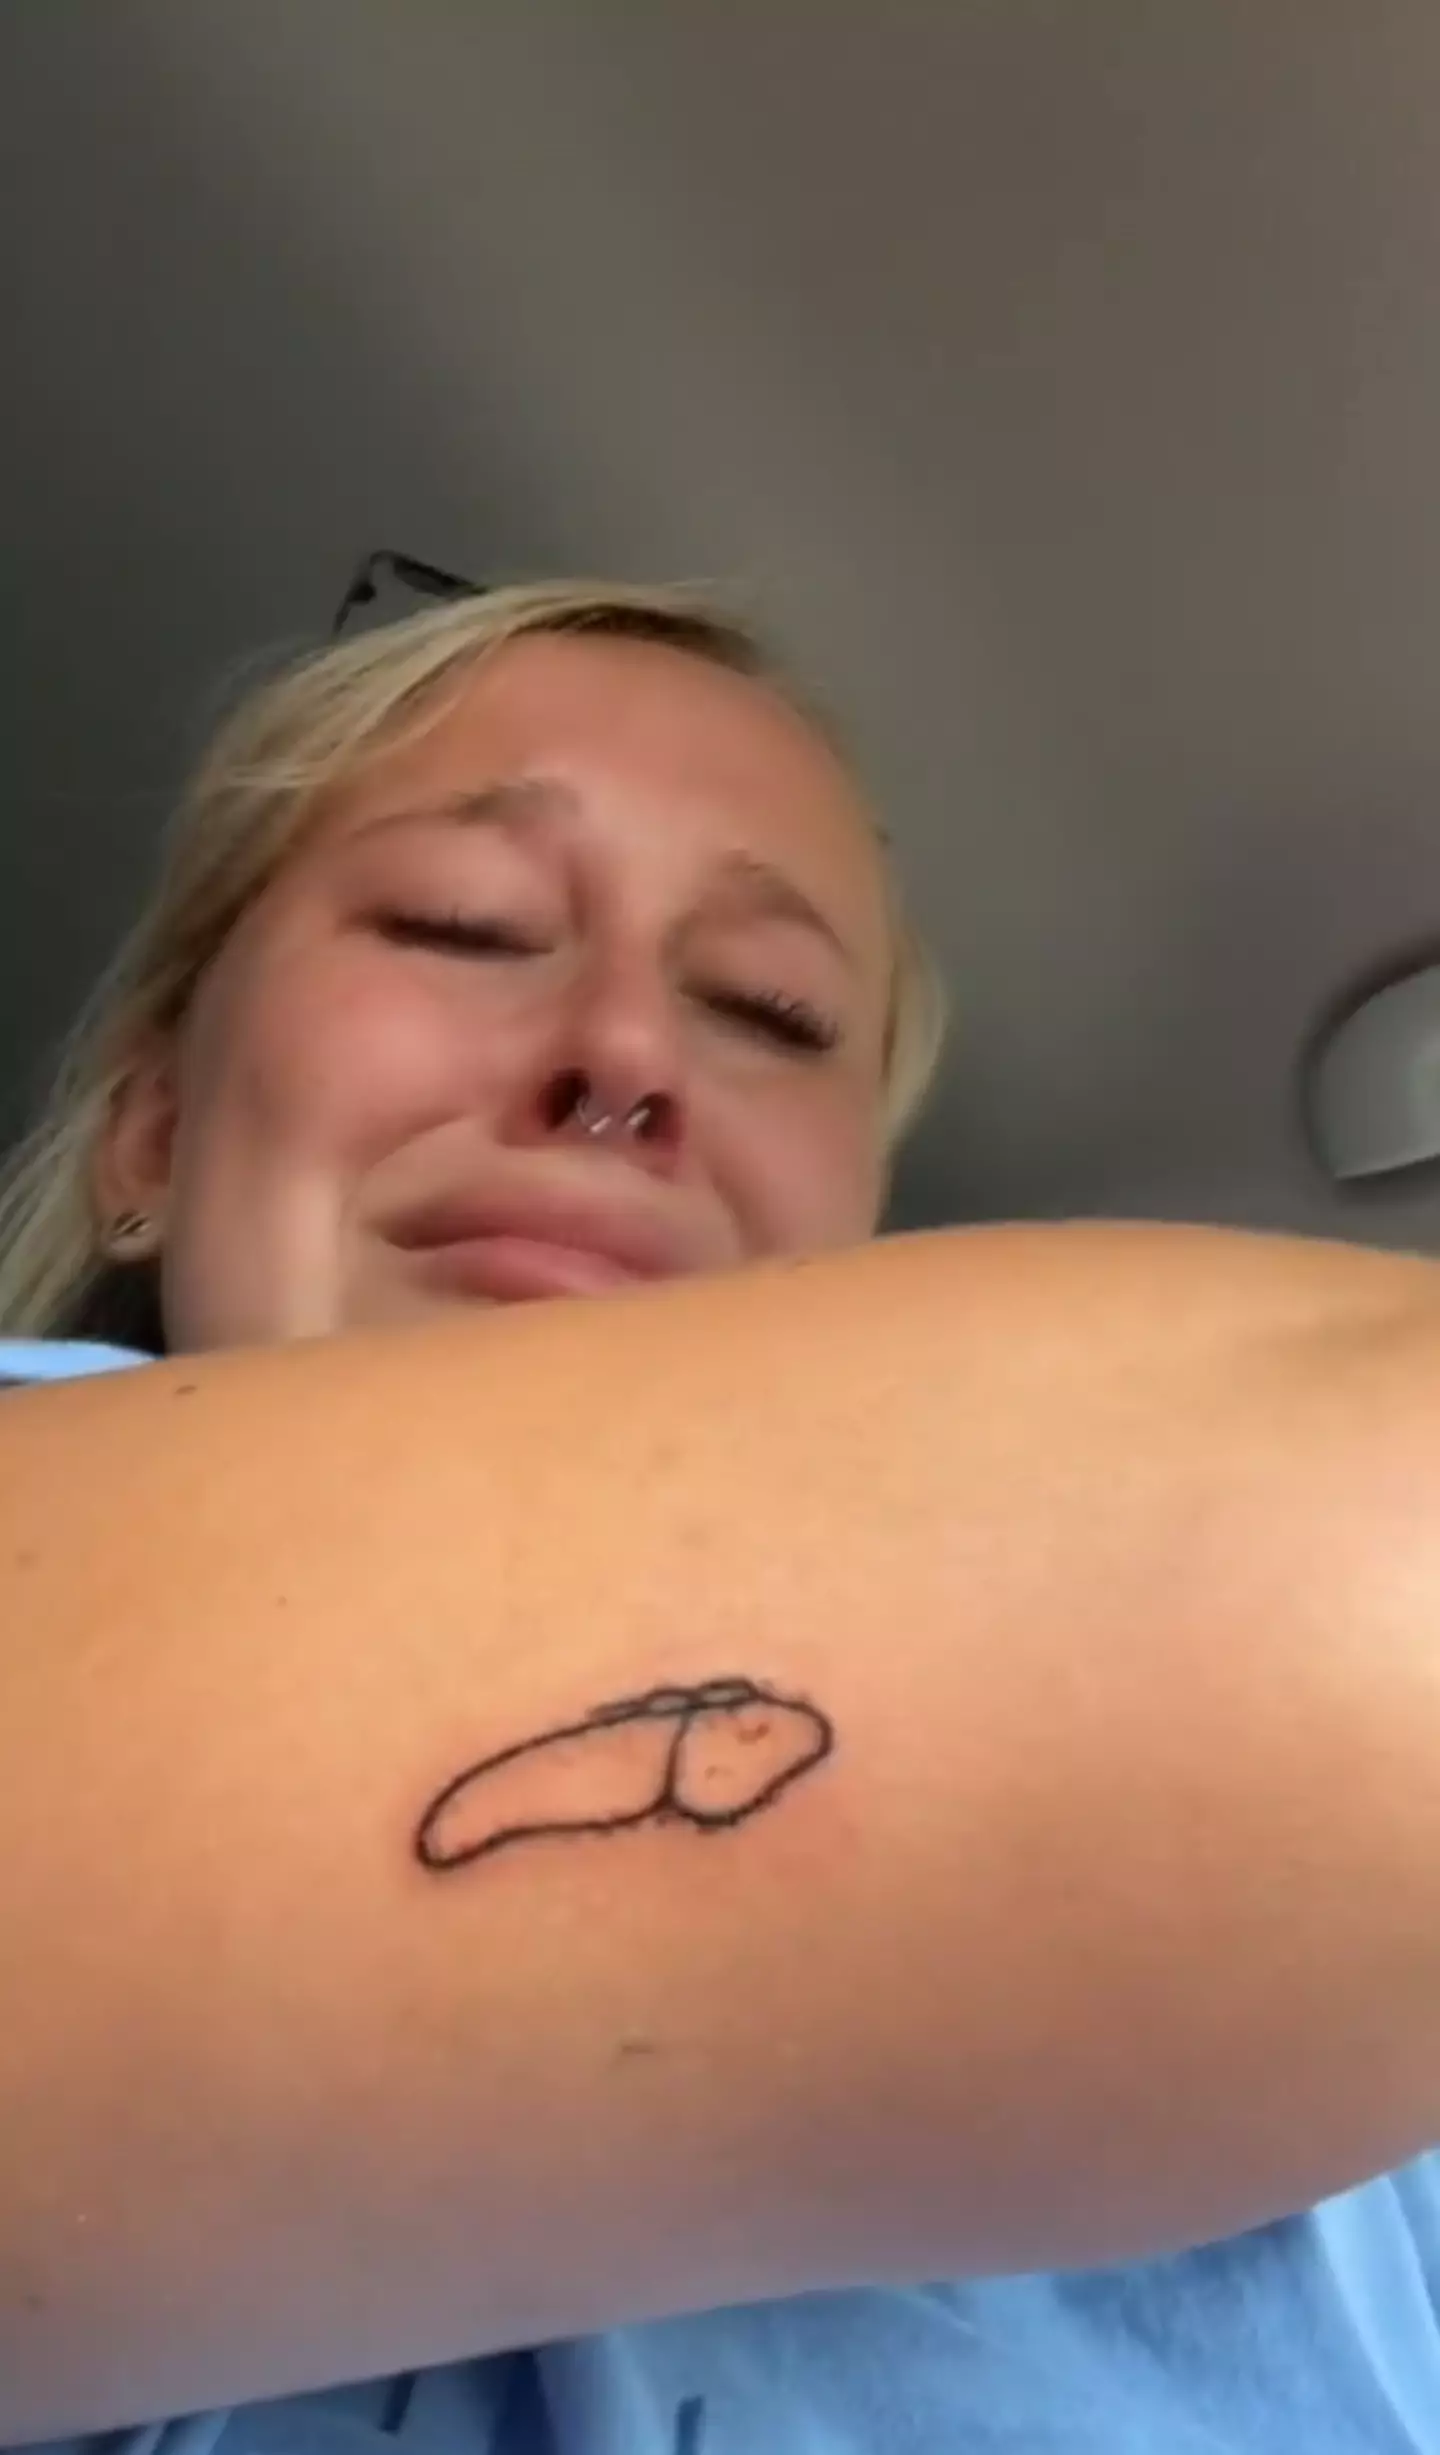 A woman was left in tears after getting matching tattoos with a pal (TikTok/@lanicole001)